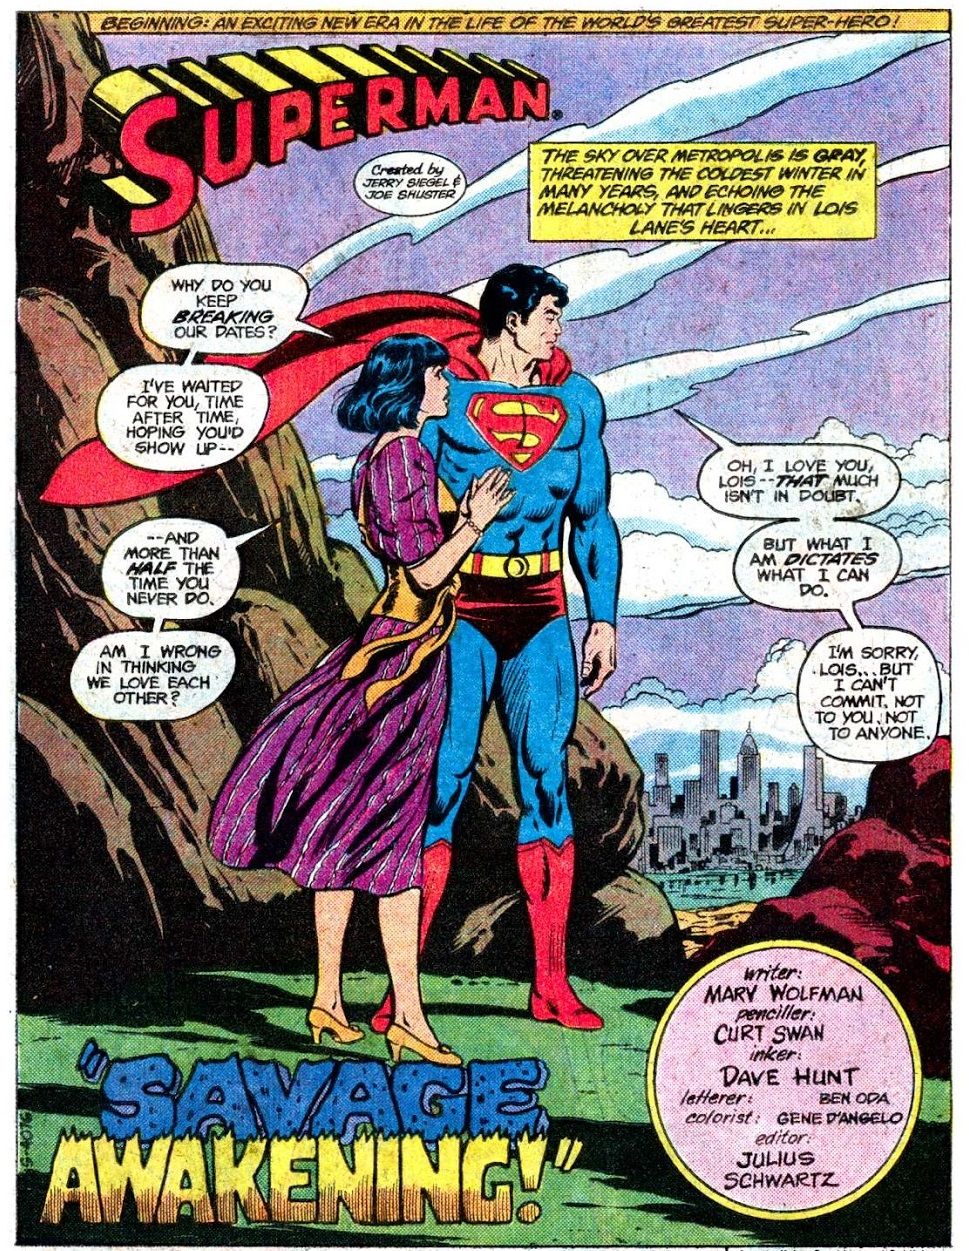 How Superman III Led to a Major Romance in the Comic Books